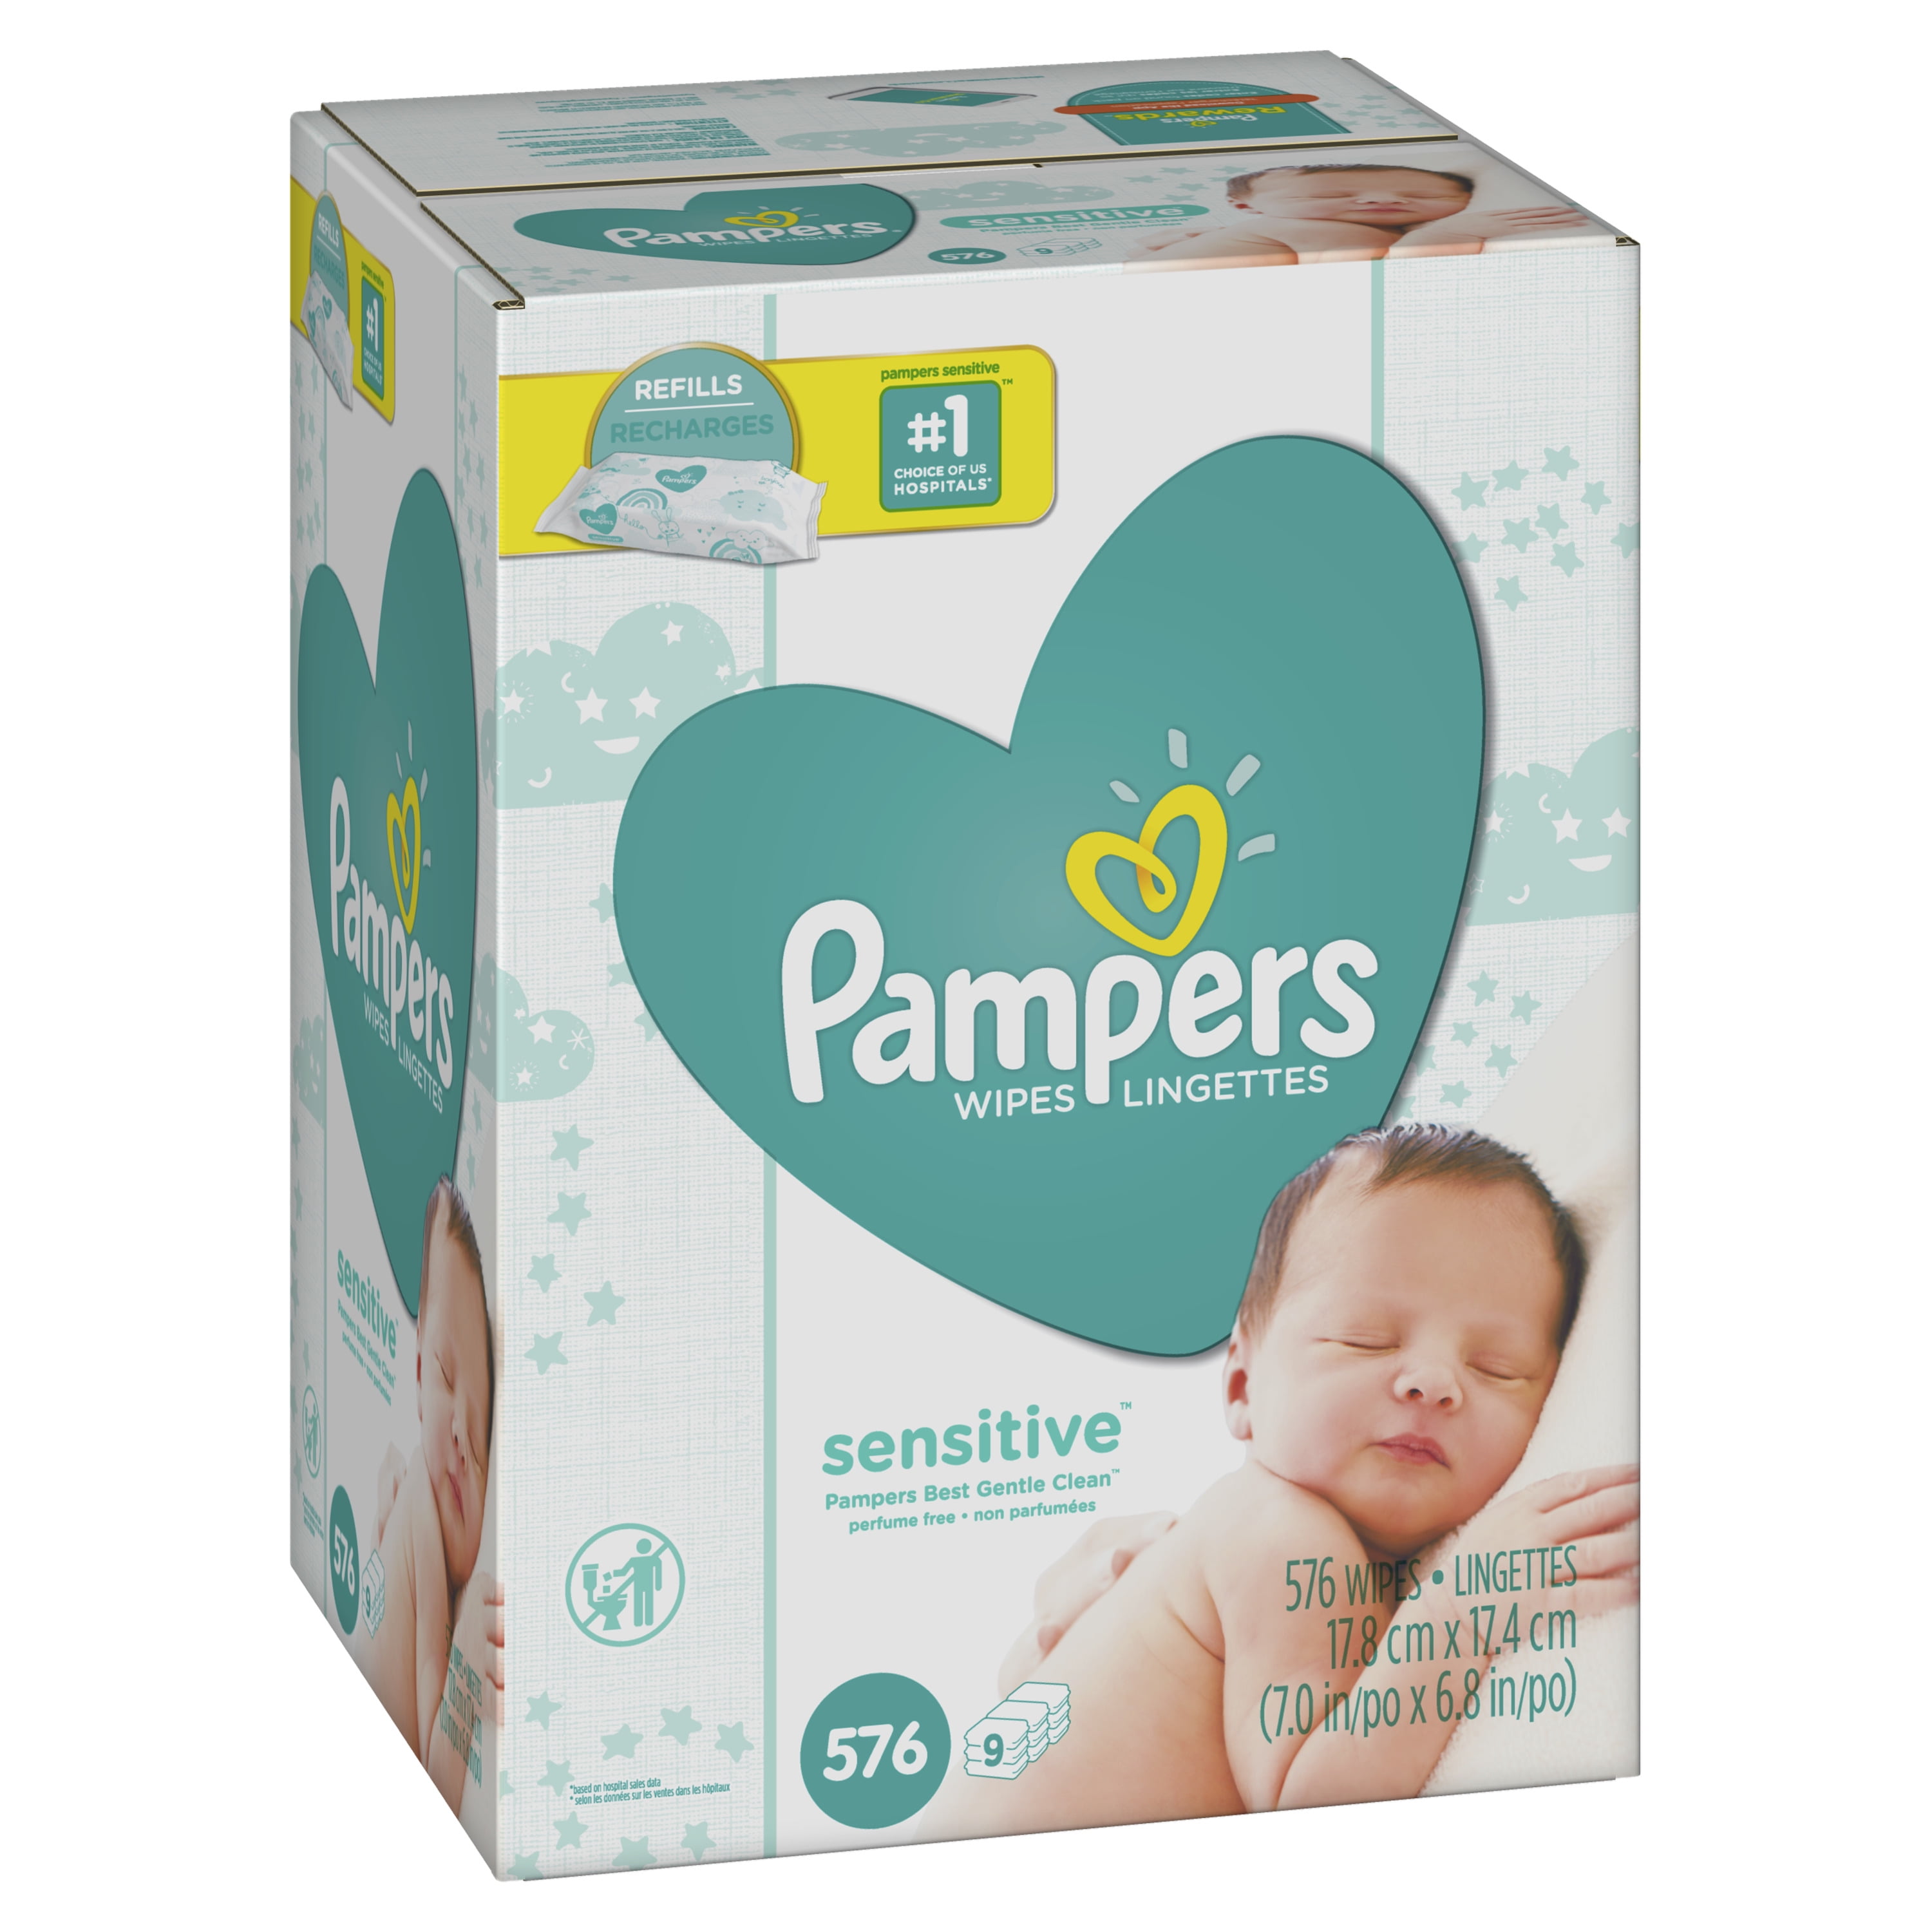 pampers wipes